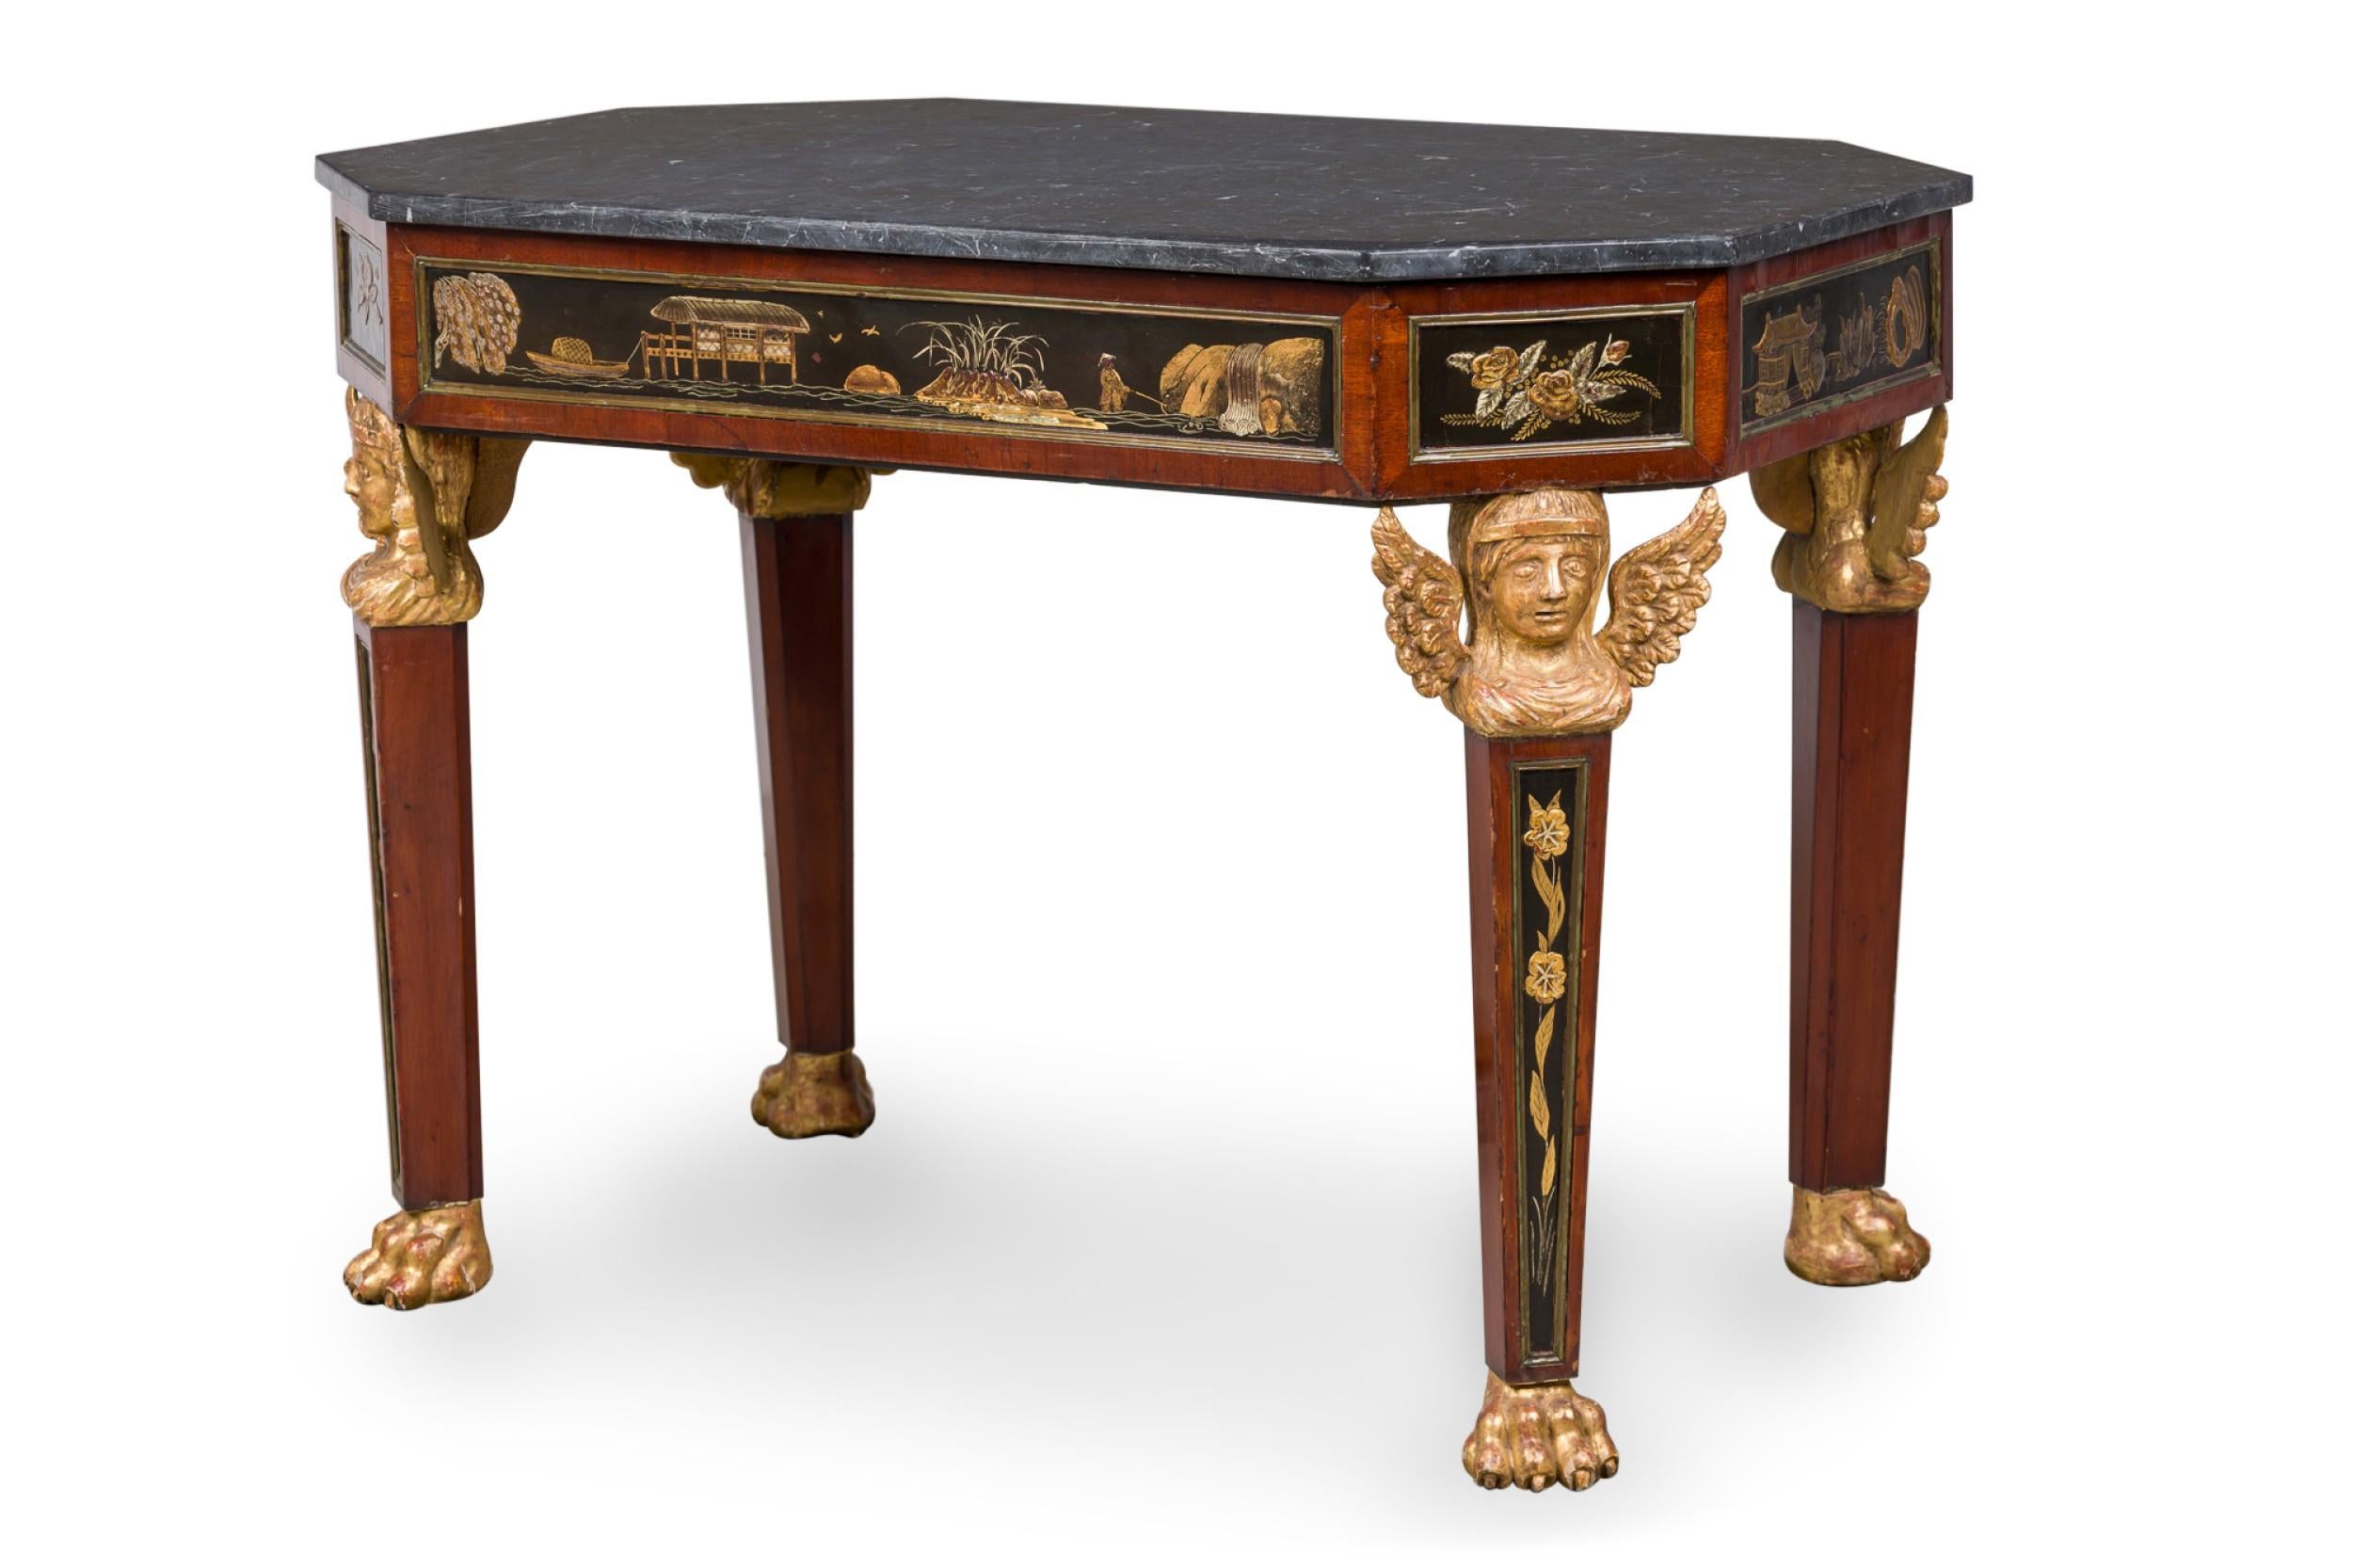 Possibly Russian (early 19th Century) mahogany center table with cantered corners and having a Chinoiserie gilt and lacquer decorated frieze supported on 4 tapered rectangular legs topped by winged Egyptian caryatid heads, resting on 4 lion\'s paw